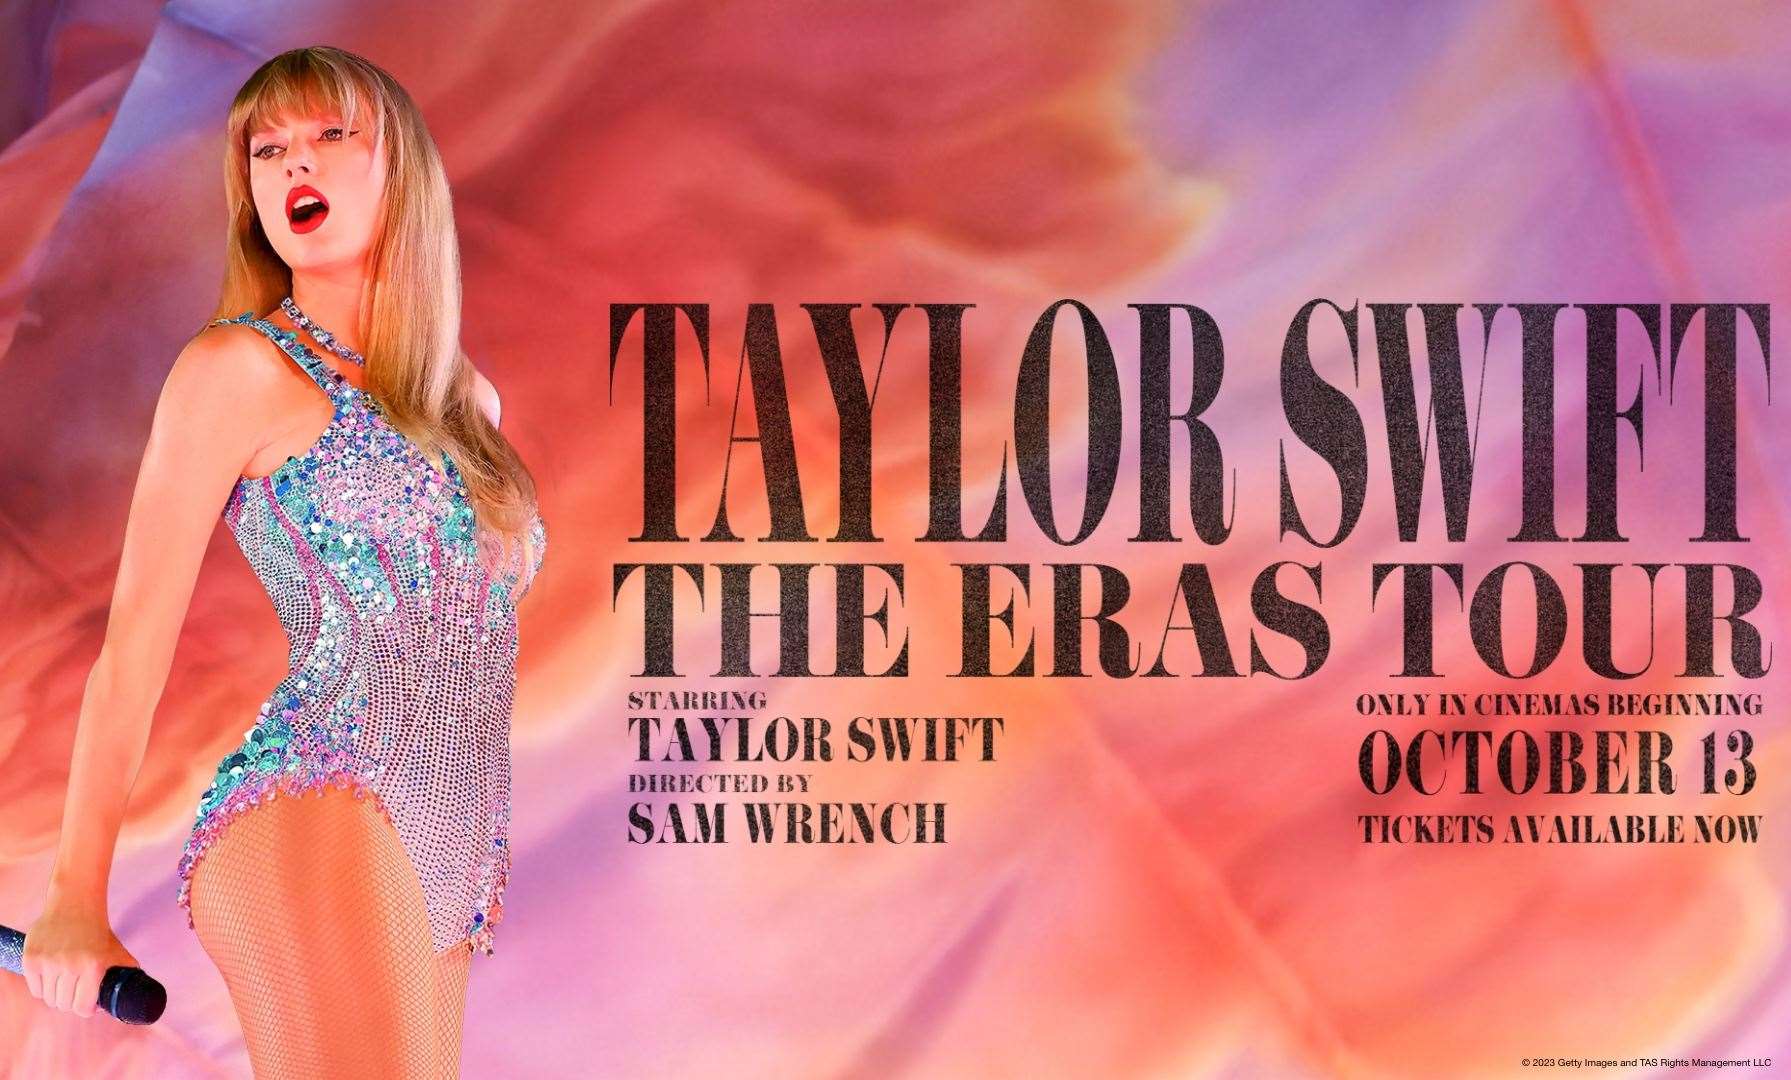 The concert film of Taylor Swif’ts Eras Tour is coming to Kent cinemas